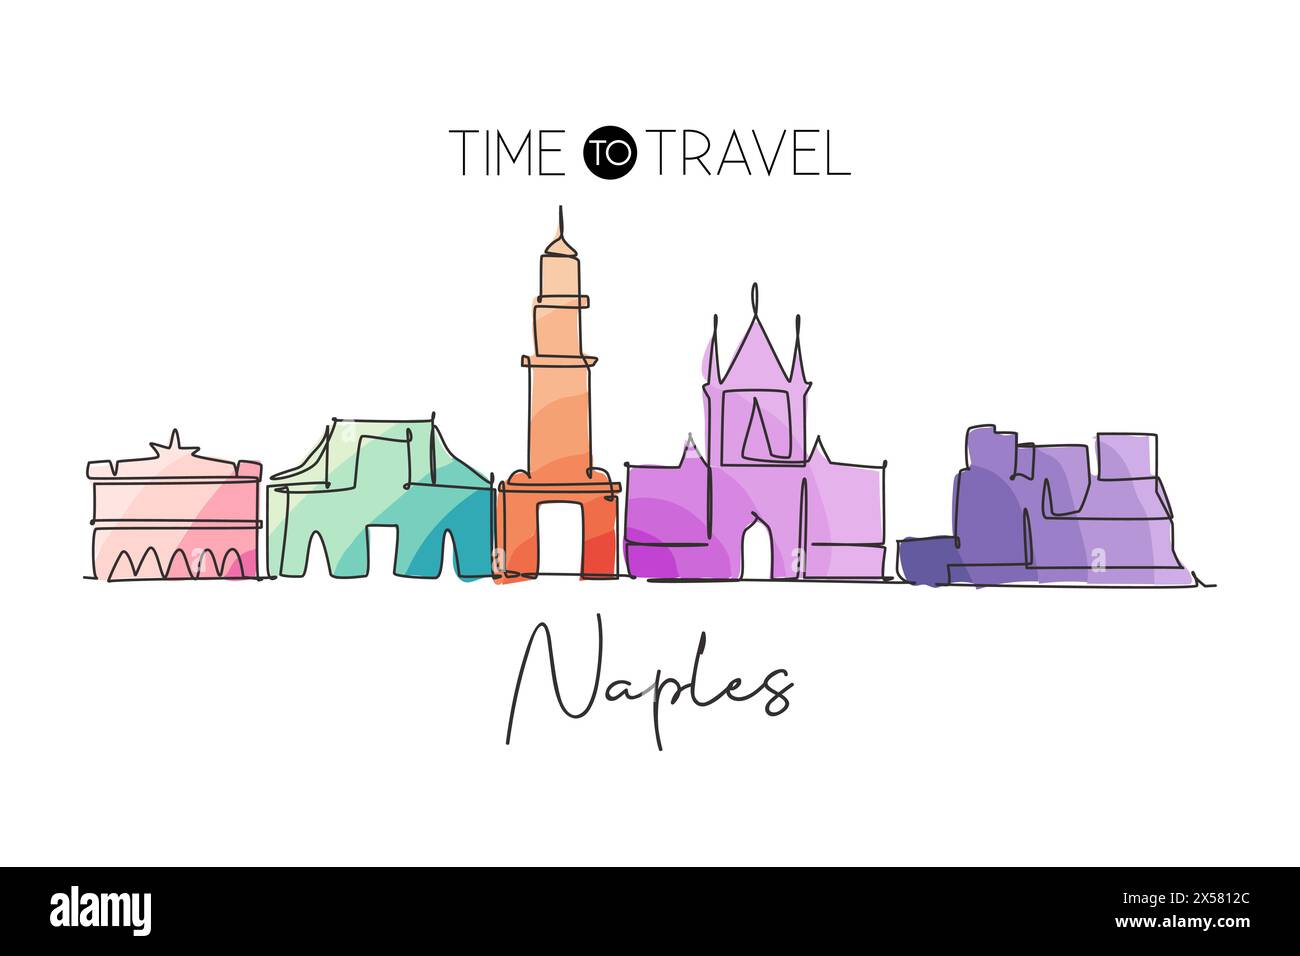 Single continuous line drawing of Naples city skyline, Italy. Famous city skyscraper landscape. World travel home wall decor poster print art concept. Stock Vector